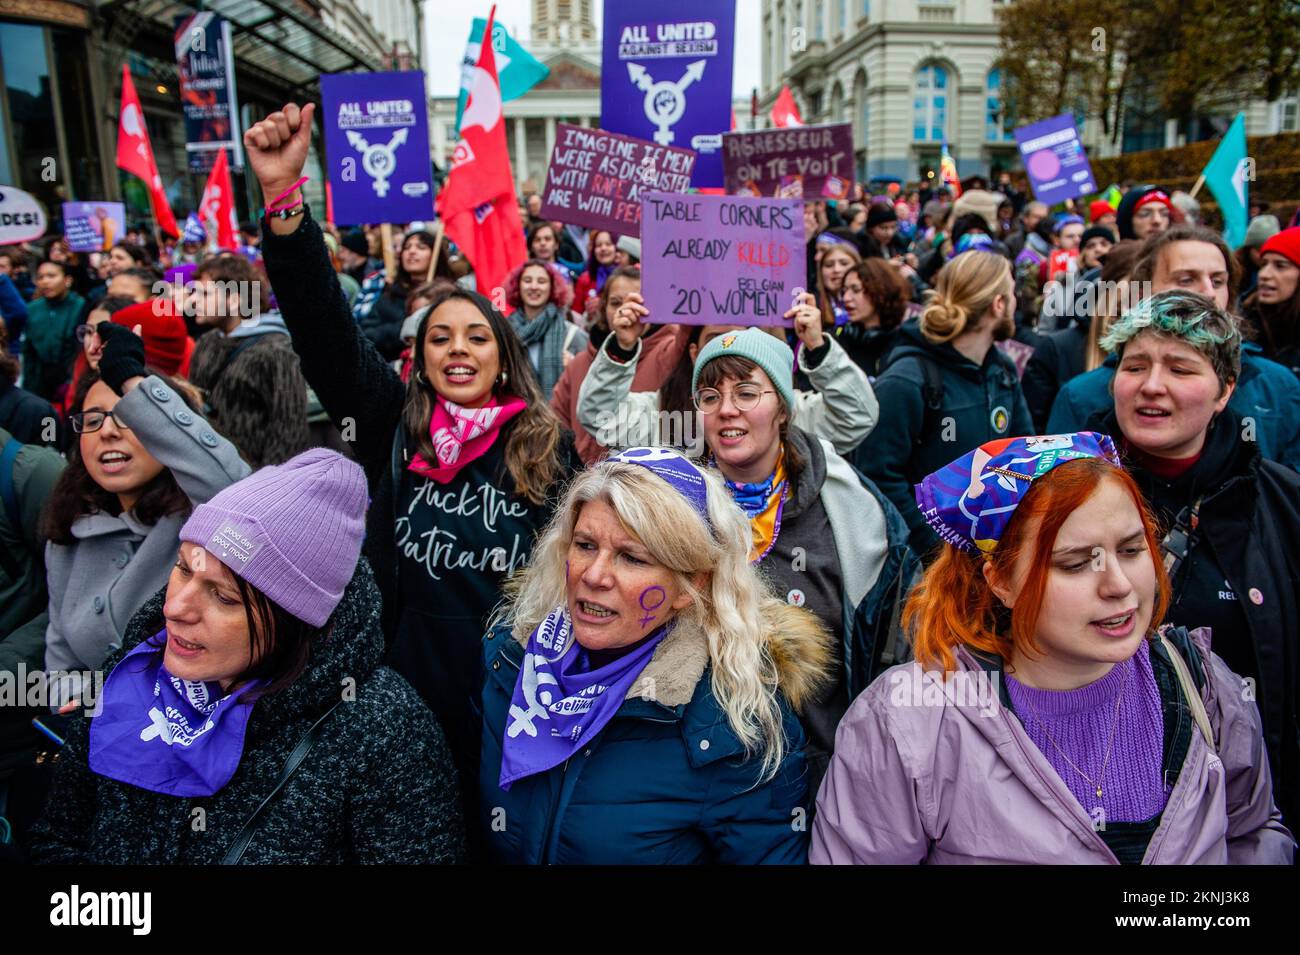 Women wearing purple clothes are seen shouting slogans against machismo violence during the demonstration. For the sixth consecutive year, the civil society associations federated by the 'Mirabal Belgium' platform are calling for a new National Demonstration to fight against violence against women and to encourage public authorities to fully assume their responsibilities in the fight against violence against women. In Belgium, 152 women have died since 2017, plus 20 so far in 2022. Thousands of people gathered in the center of Brussels to send a strong signal on this day for the elimination of Stock Photo